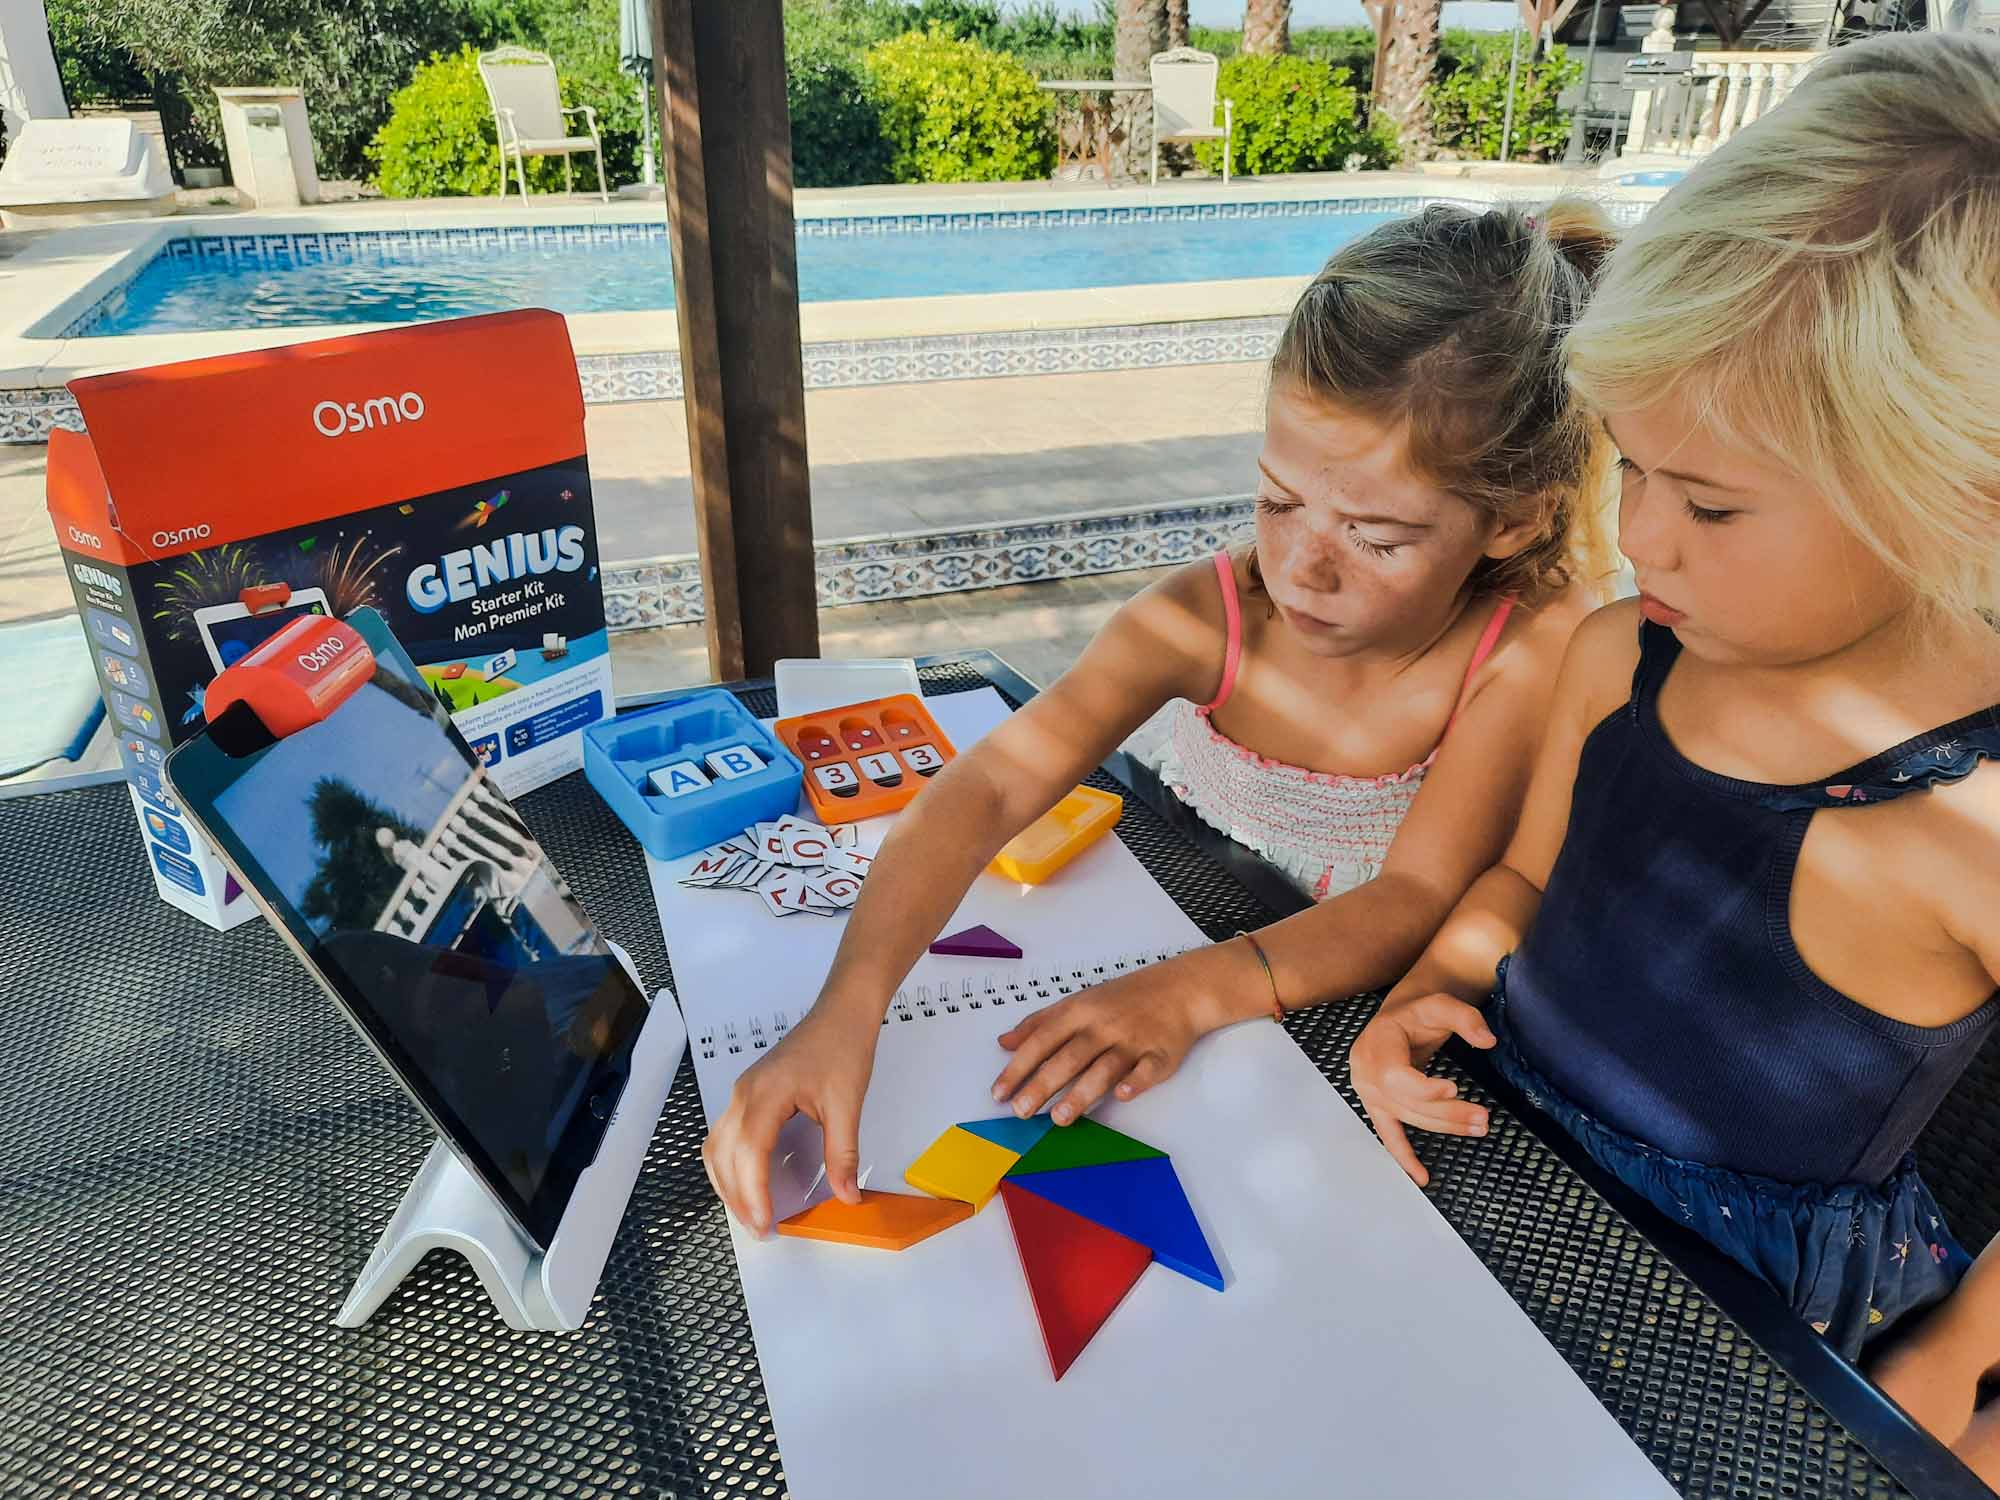 2 young girls making a picture on an outdoor table out of wooden shapes, while looking at an Ipad on a stand